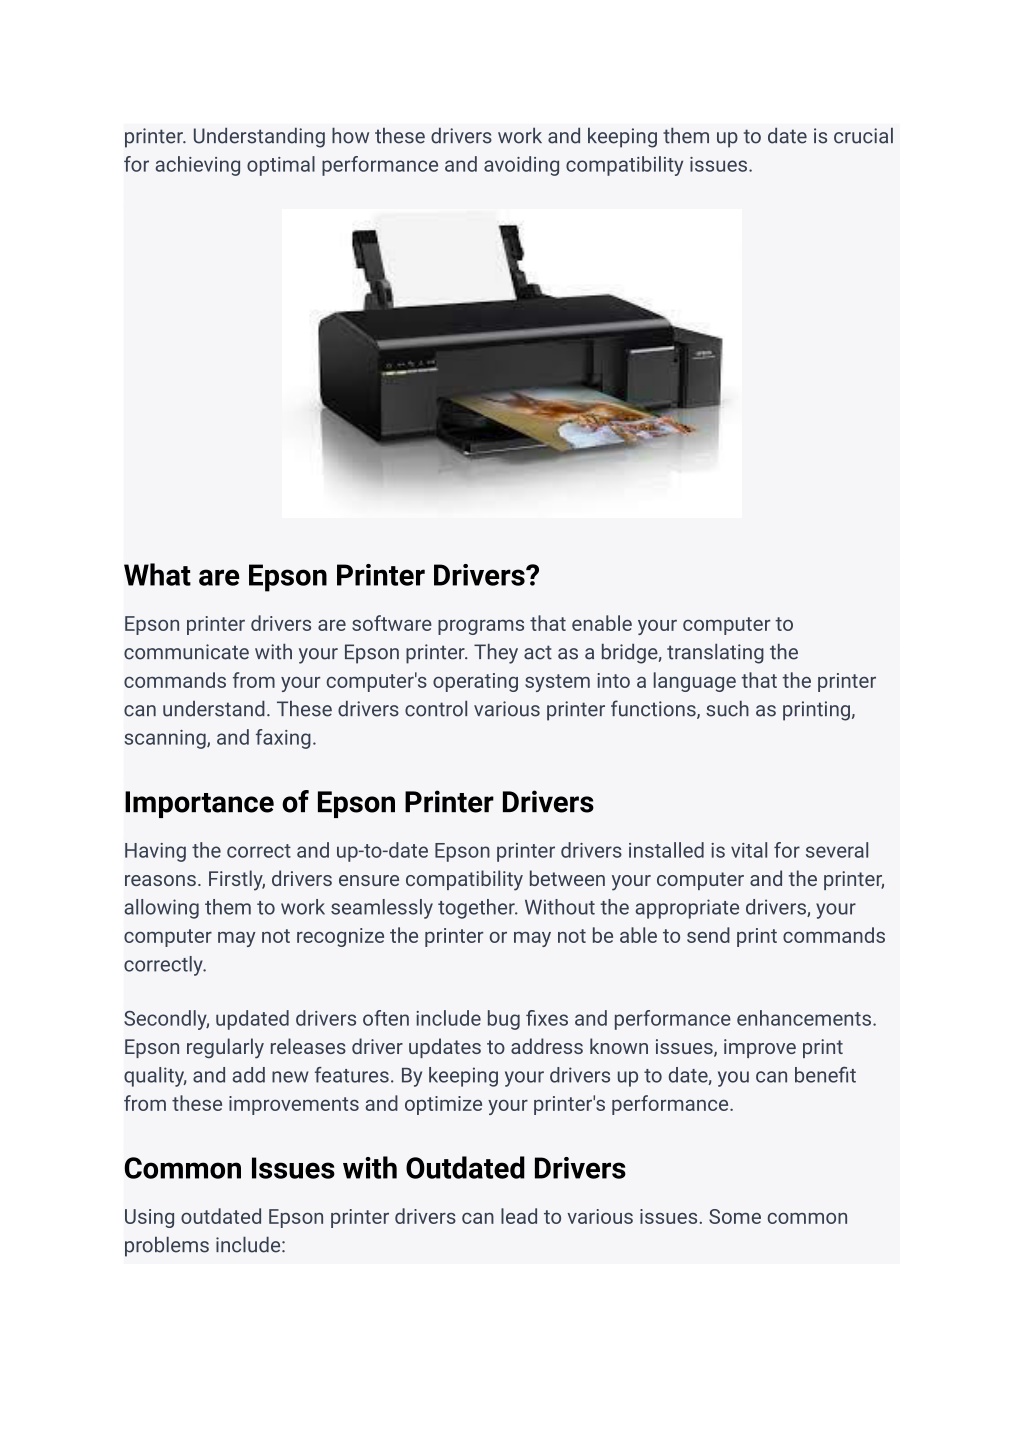 Ppt Understanding Epson Printer Drivers How To Install And Update For Optimal Performance 7767